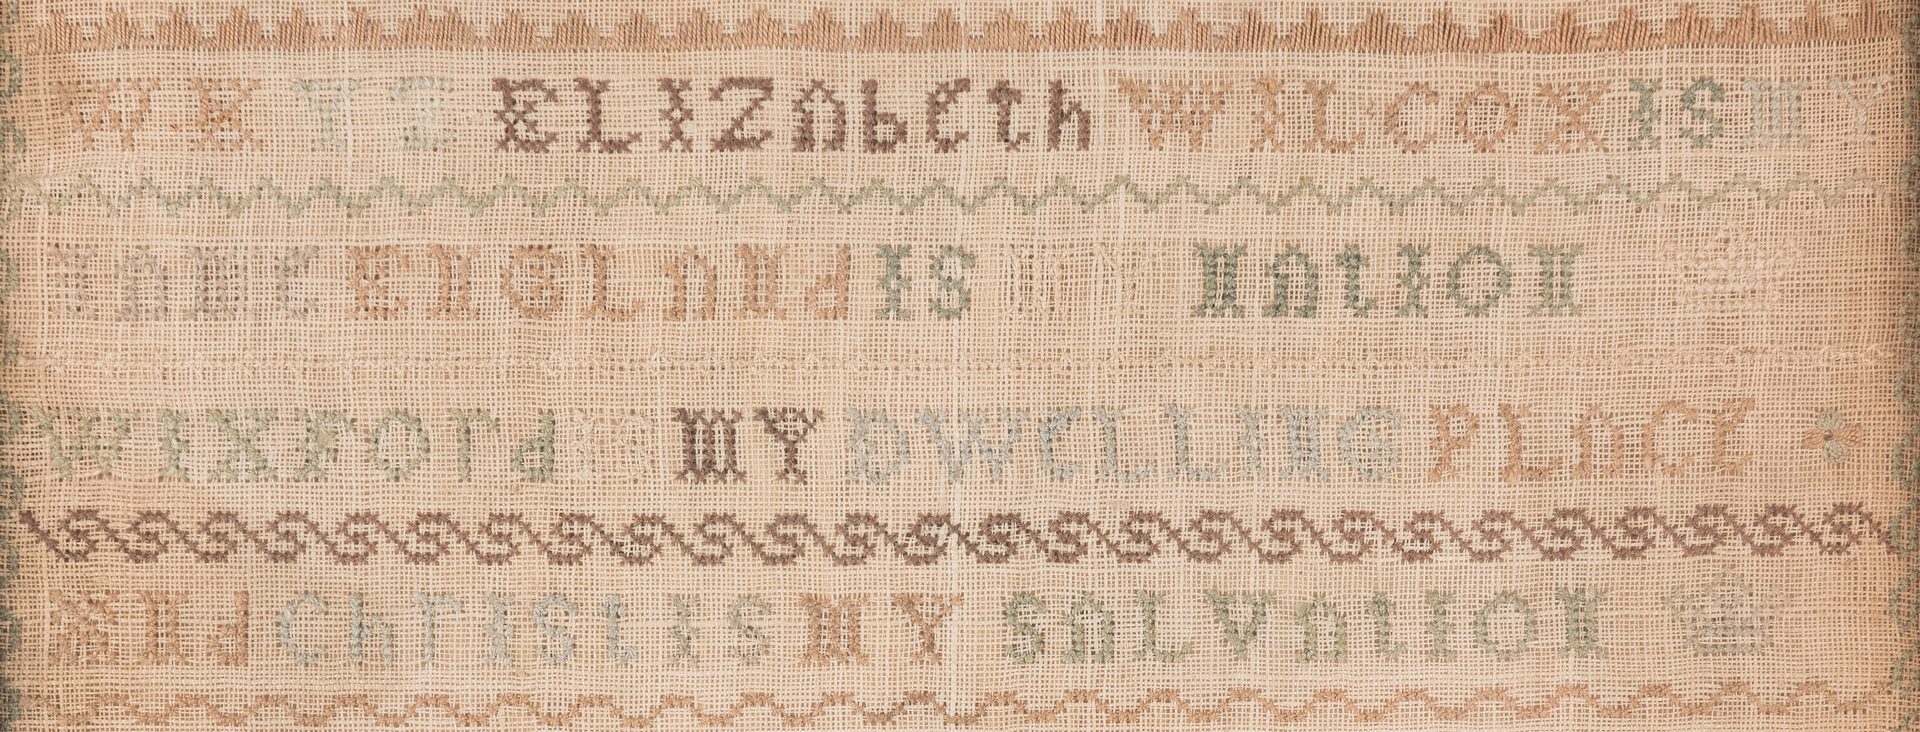 Lot 643: 3 English Samplers, 18th/19th Cent.